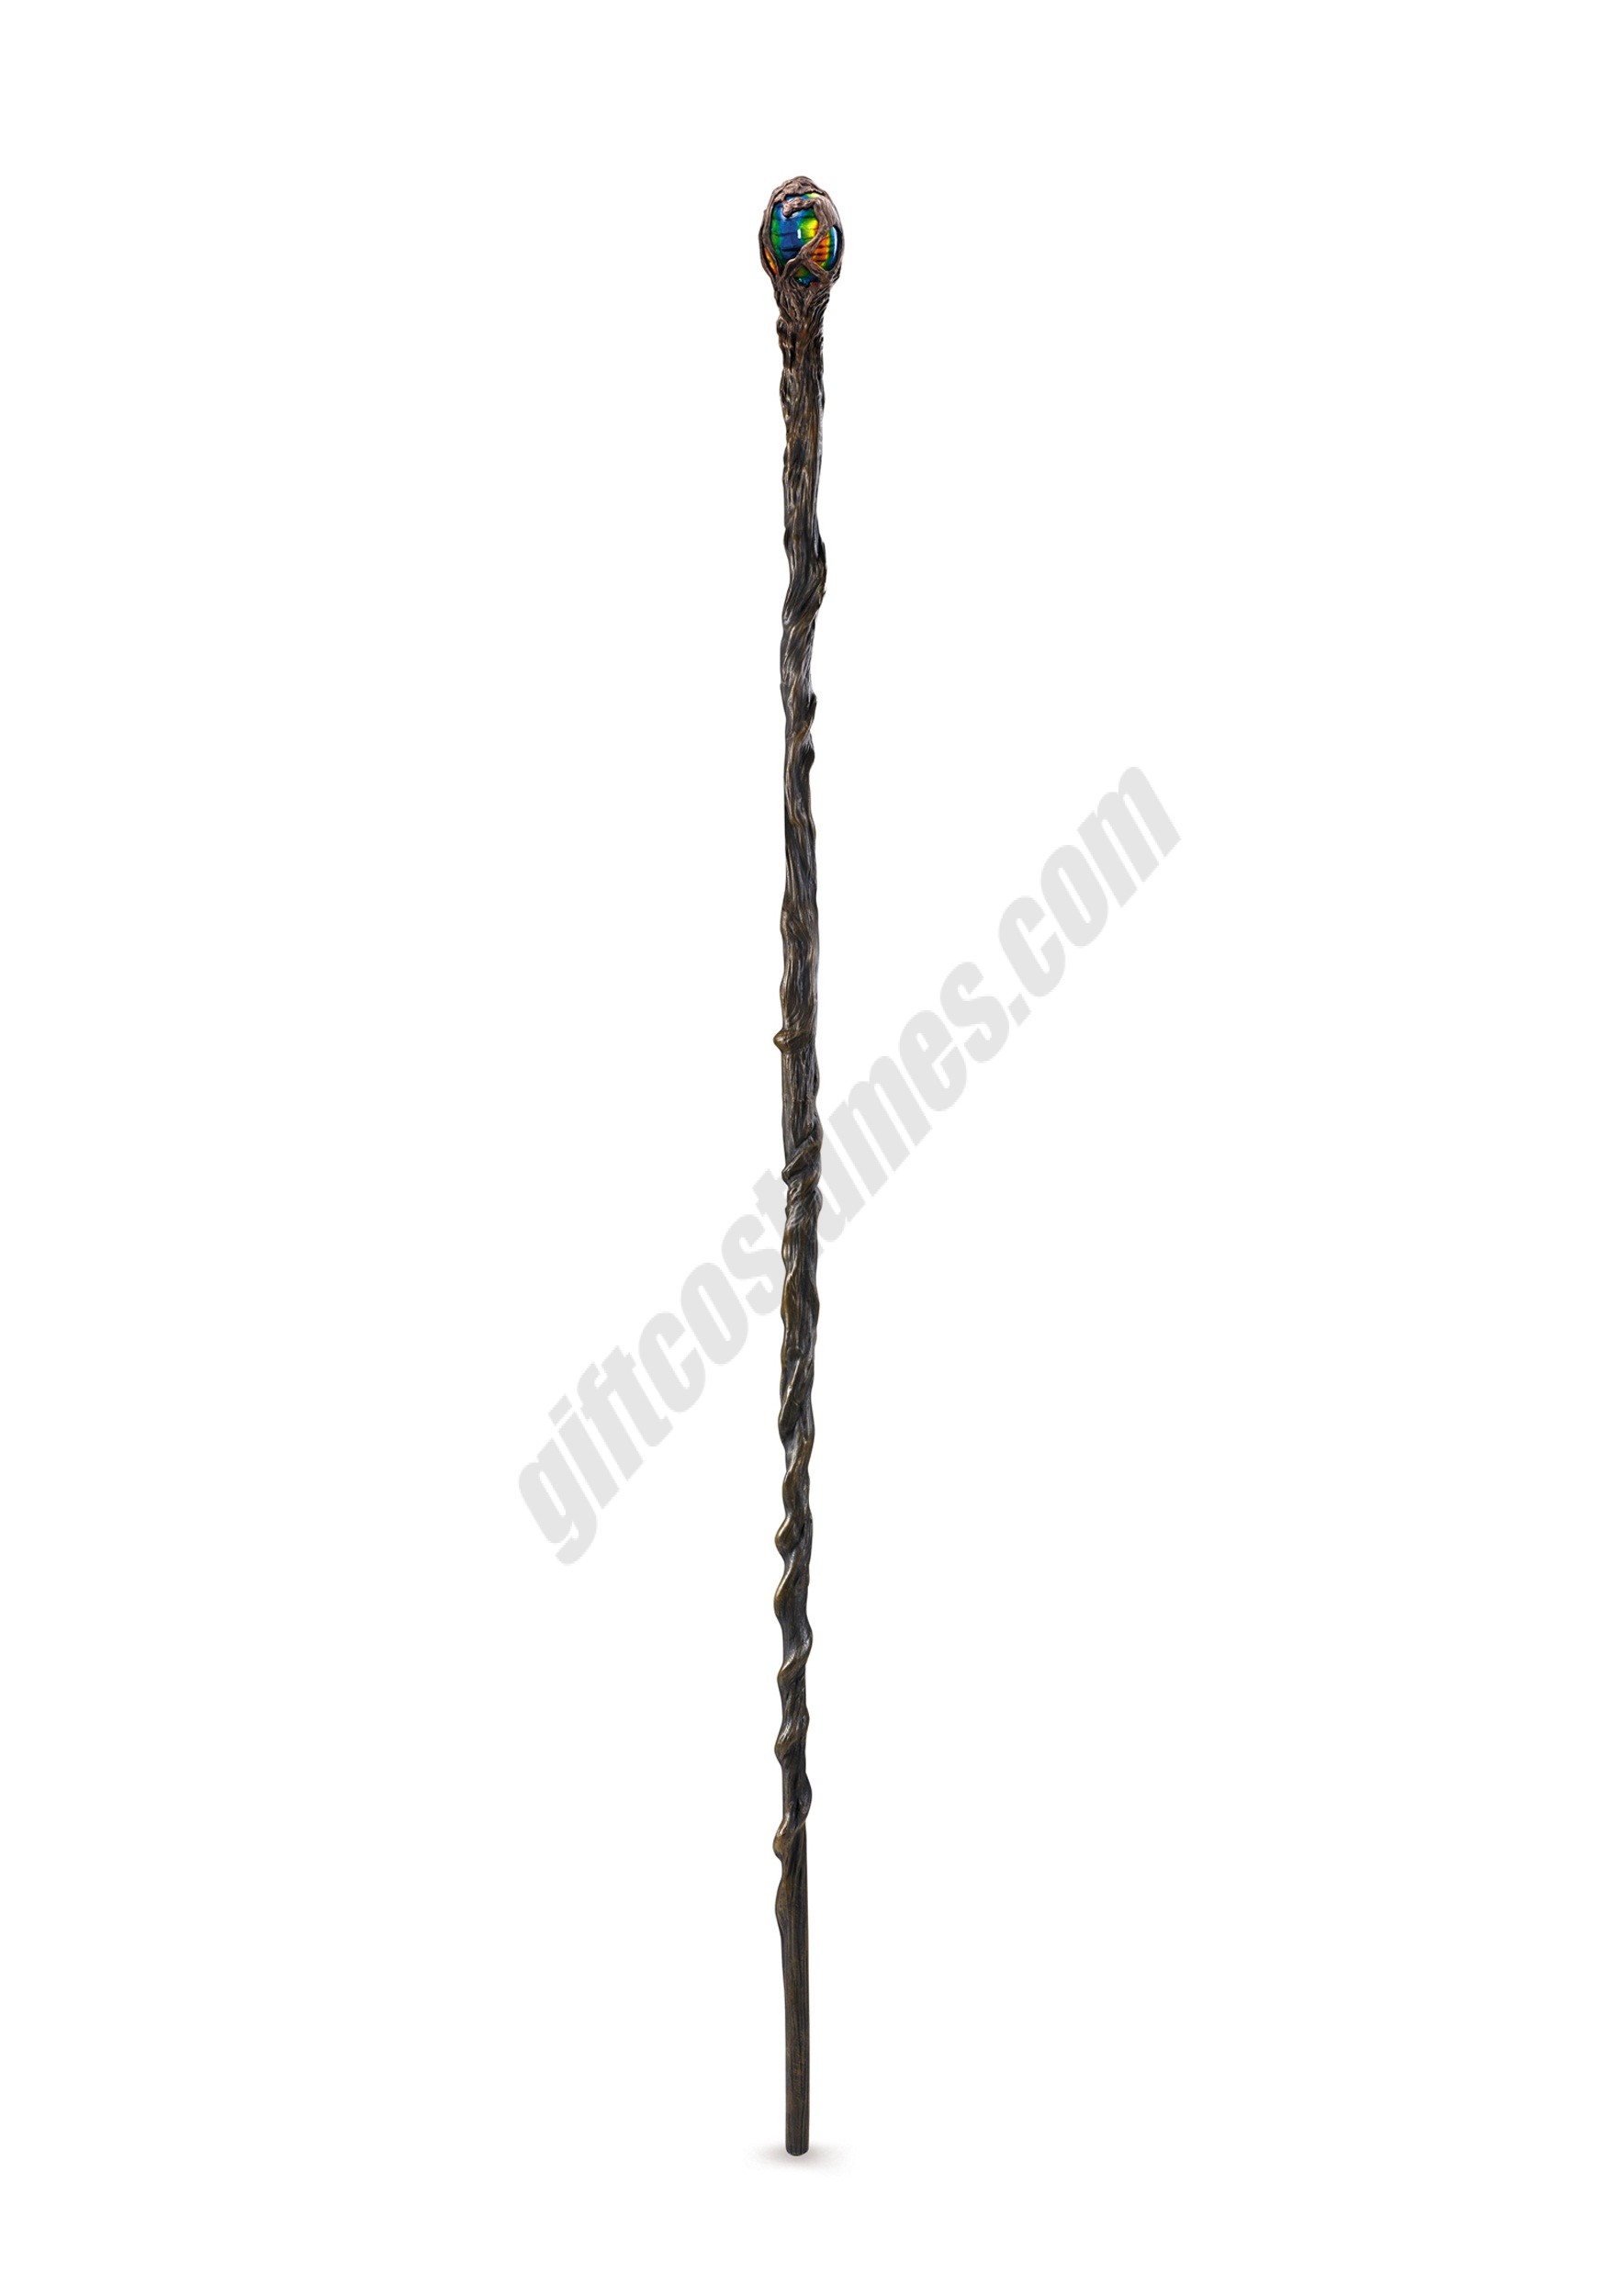 Deluxe Maleficent Glowing Staff Promotions - Deluxe Maleficent Glowing Staff Promotions